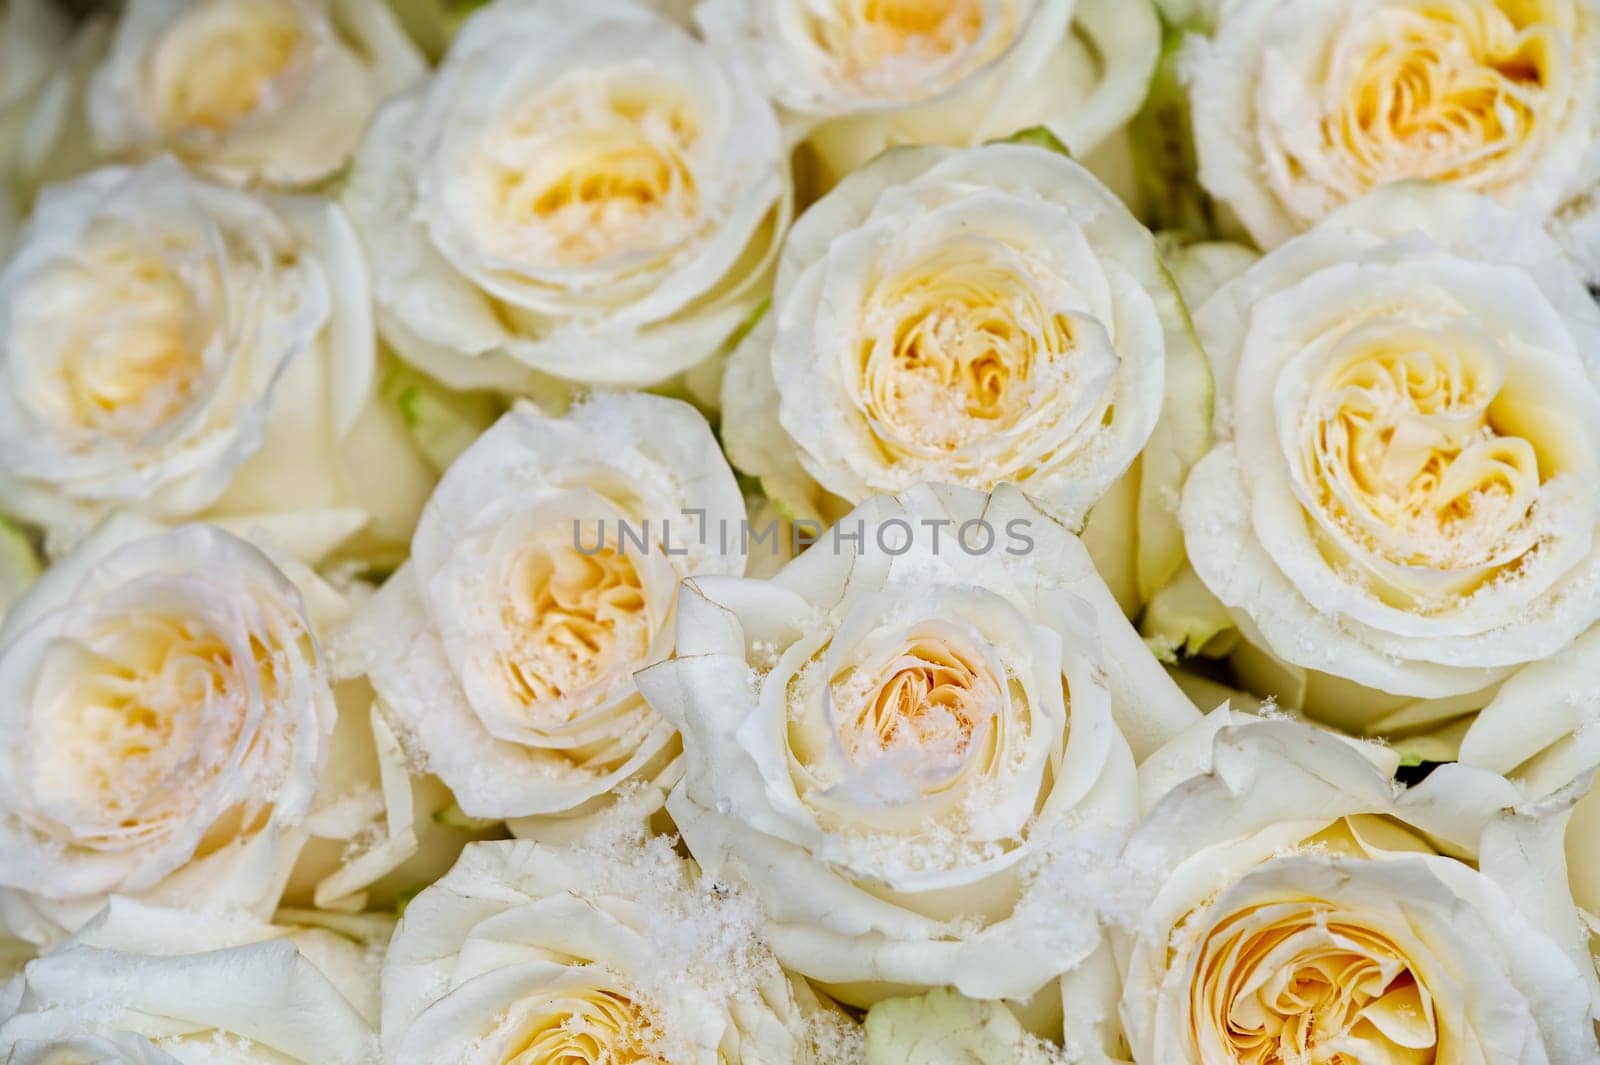 Beautiful bouquet of fresh roses in full bloom. White rose buds for background and design. Vintage style, huge bouquet of white roses